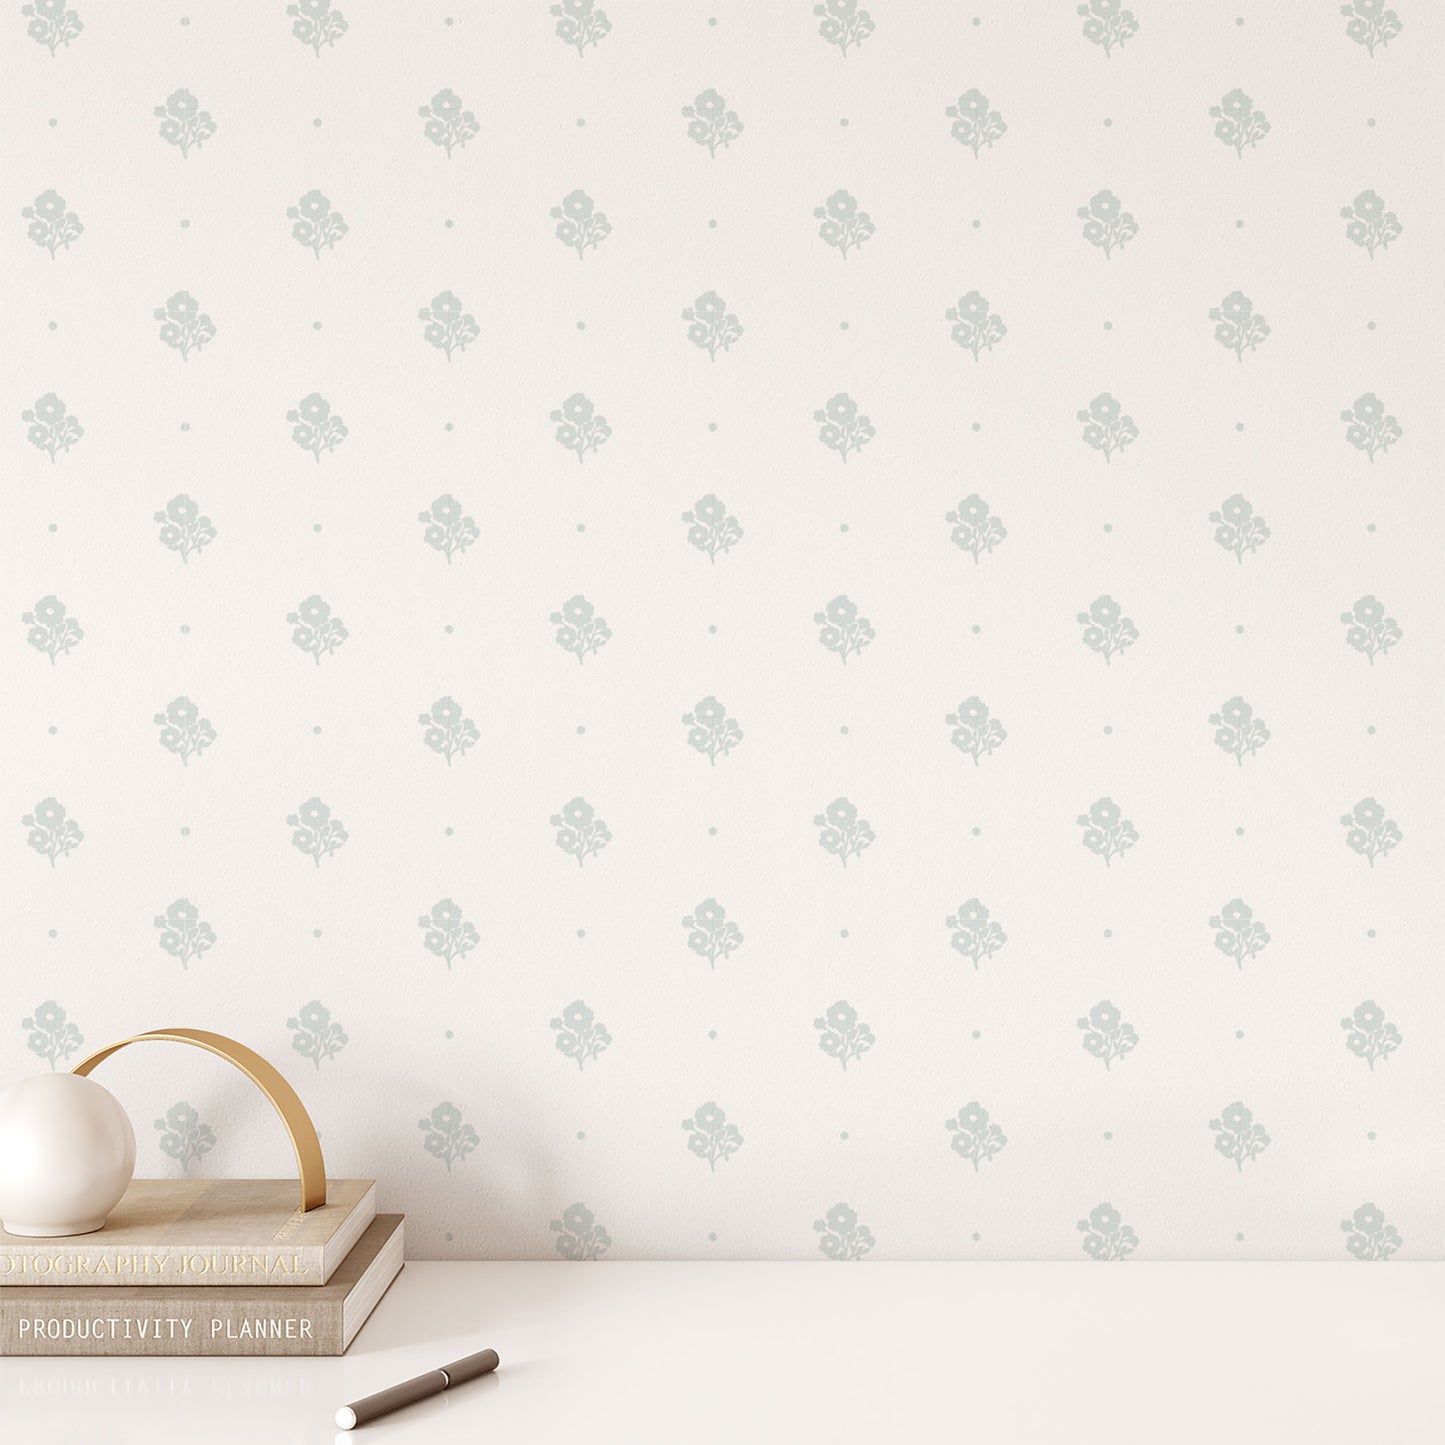 Elevate your home decor with our Cambridge Wallpaper in a sophisticated gray sage hue shown in full size image.